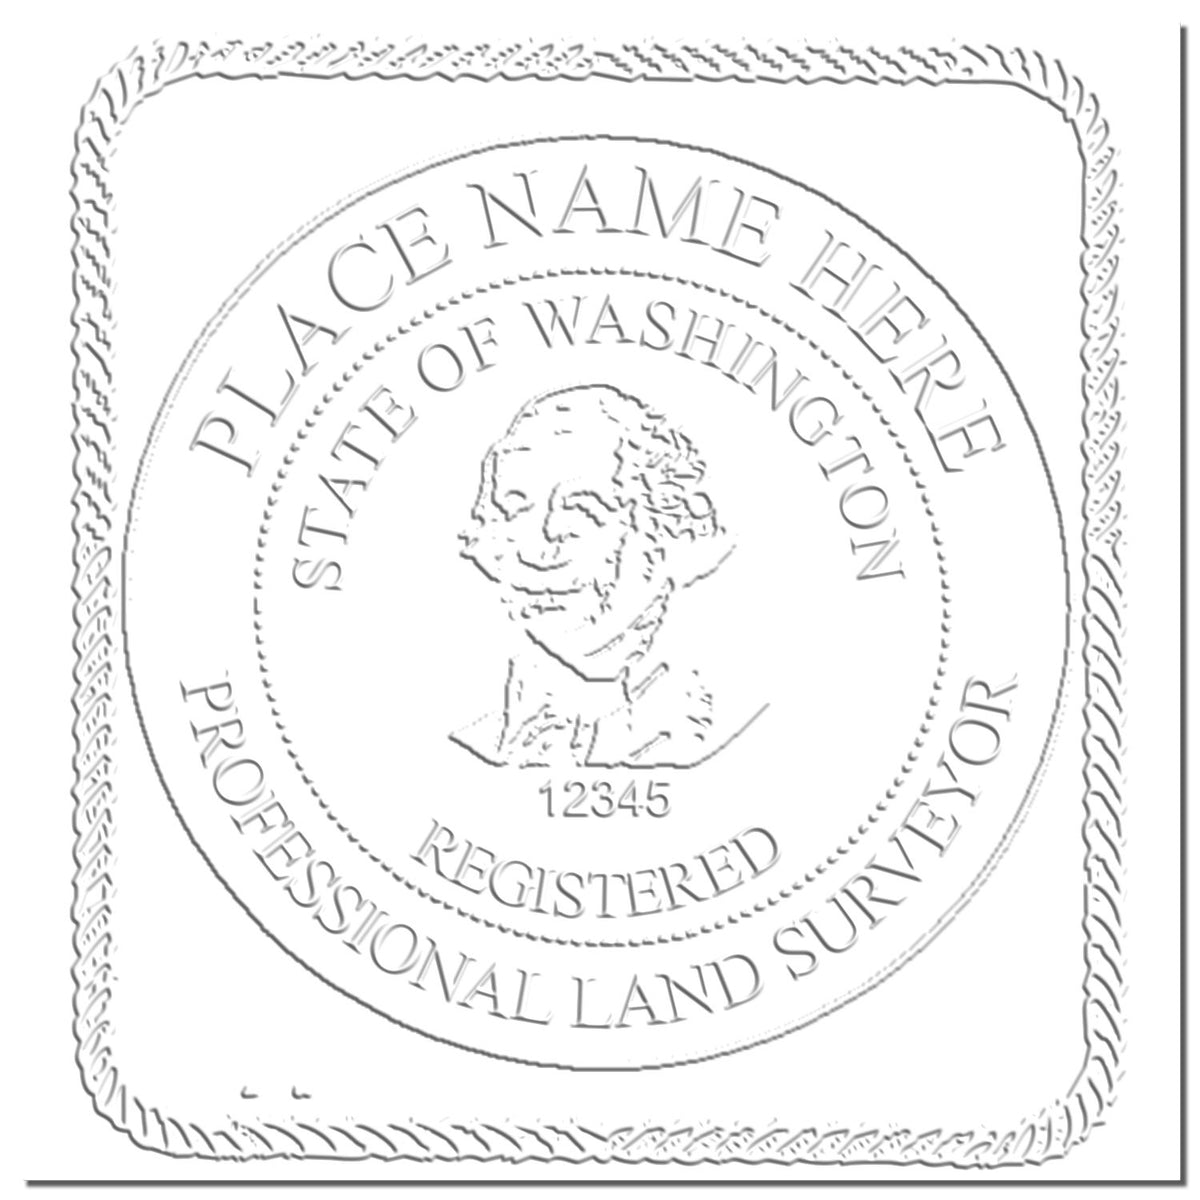 This paper is stamped with a sample imprint of the Hybrid Washington Land Surveyor Seal, signifying its quality and reliability.